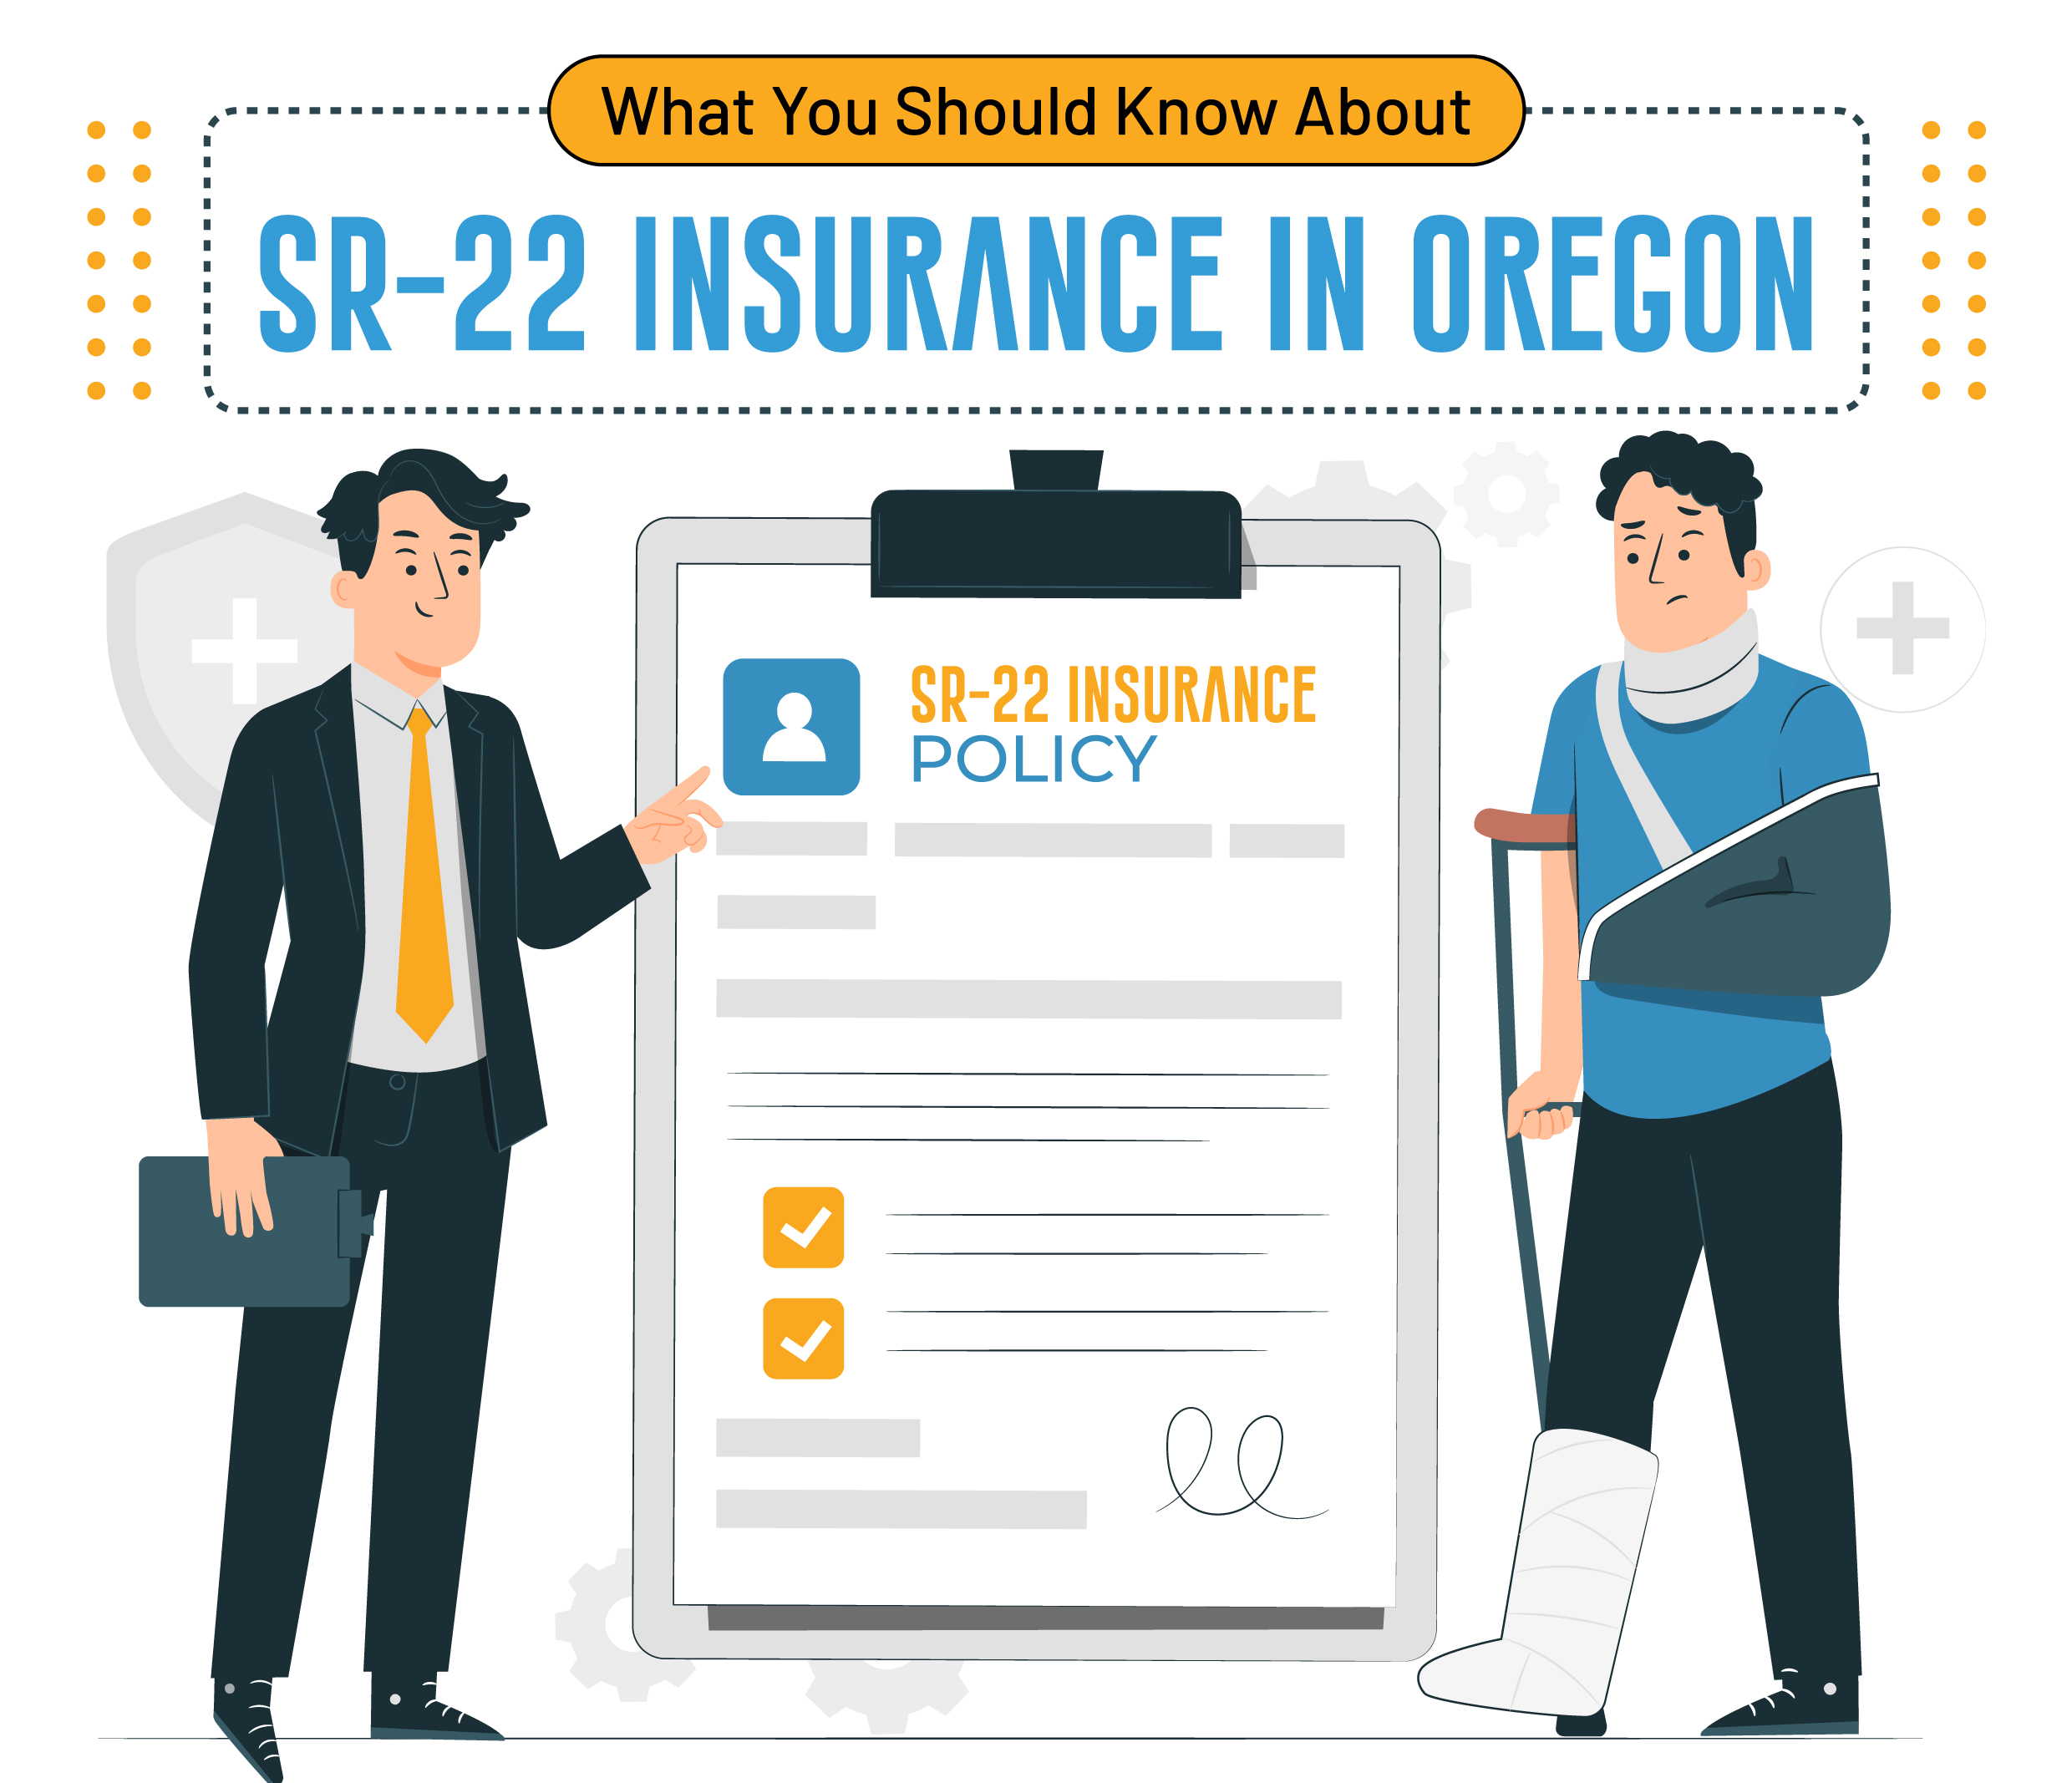 An infographic about Oregon SR-22 insurance